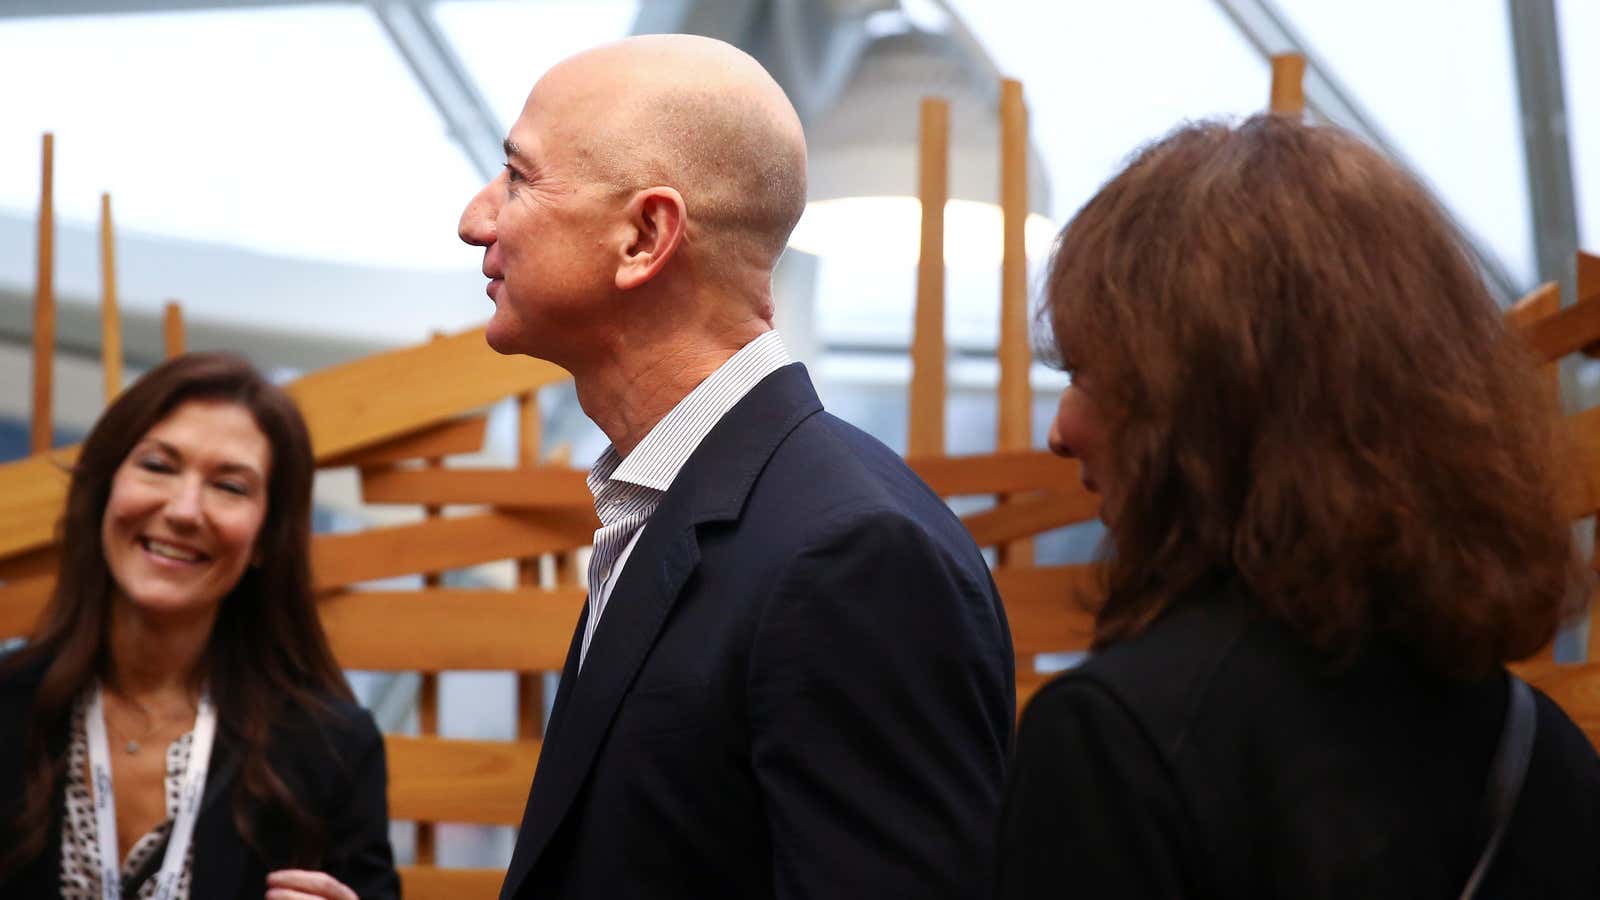 Amazon founder and CEO Jeff Bezos stands in the “bird cage” structure as he gets a tour of the new Amazon Spheres opening event at…